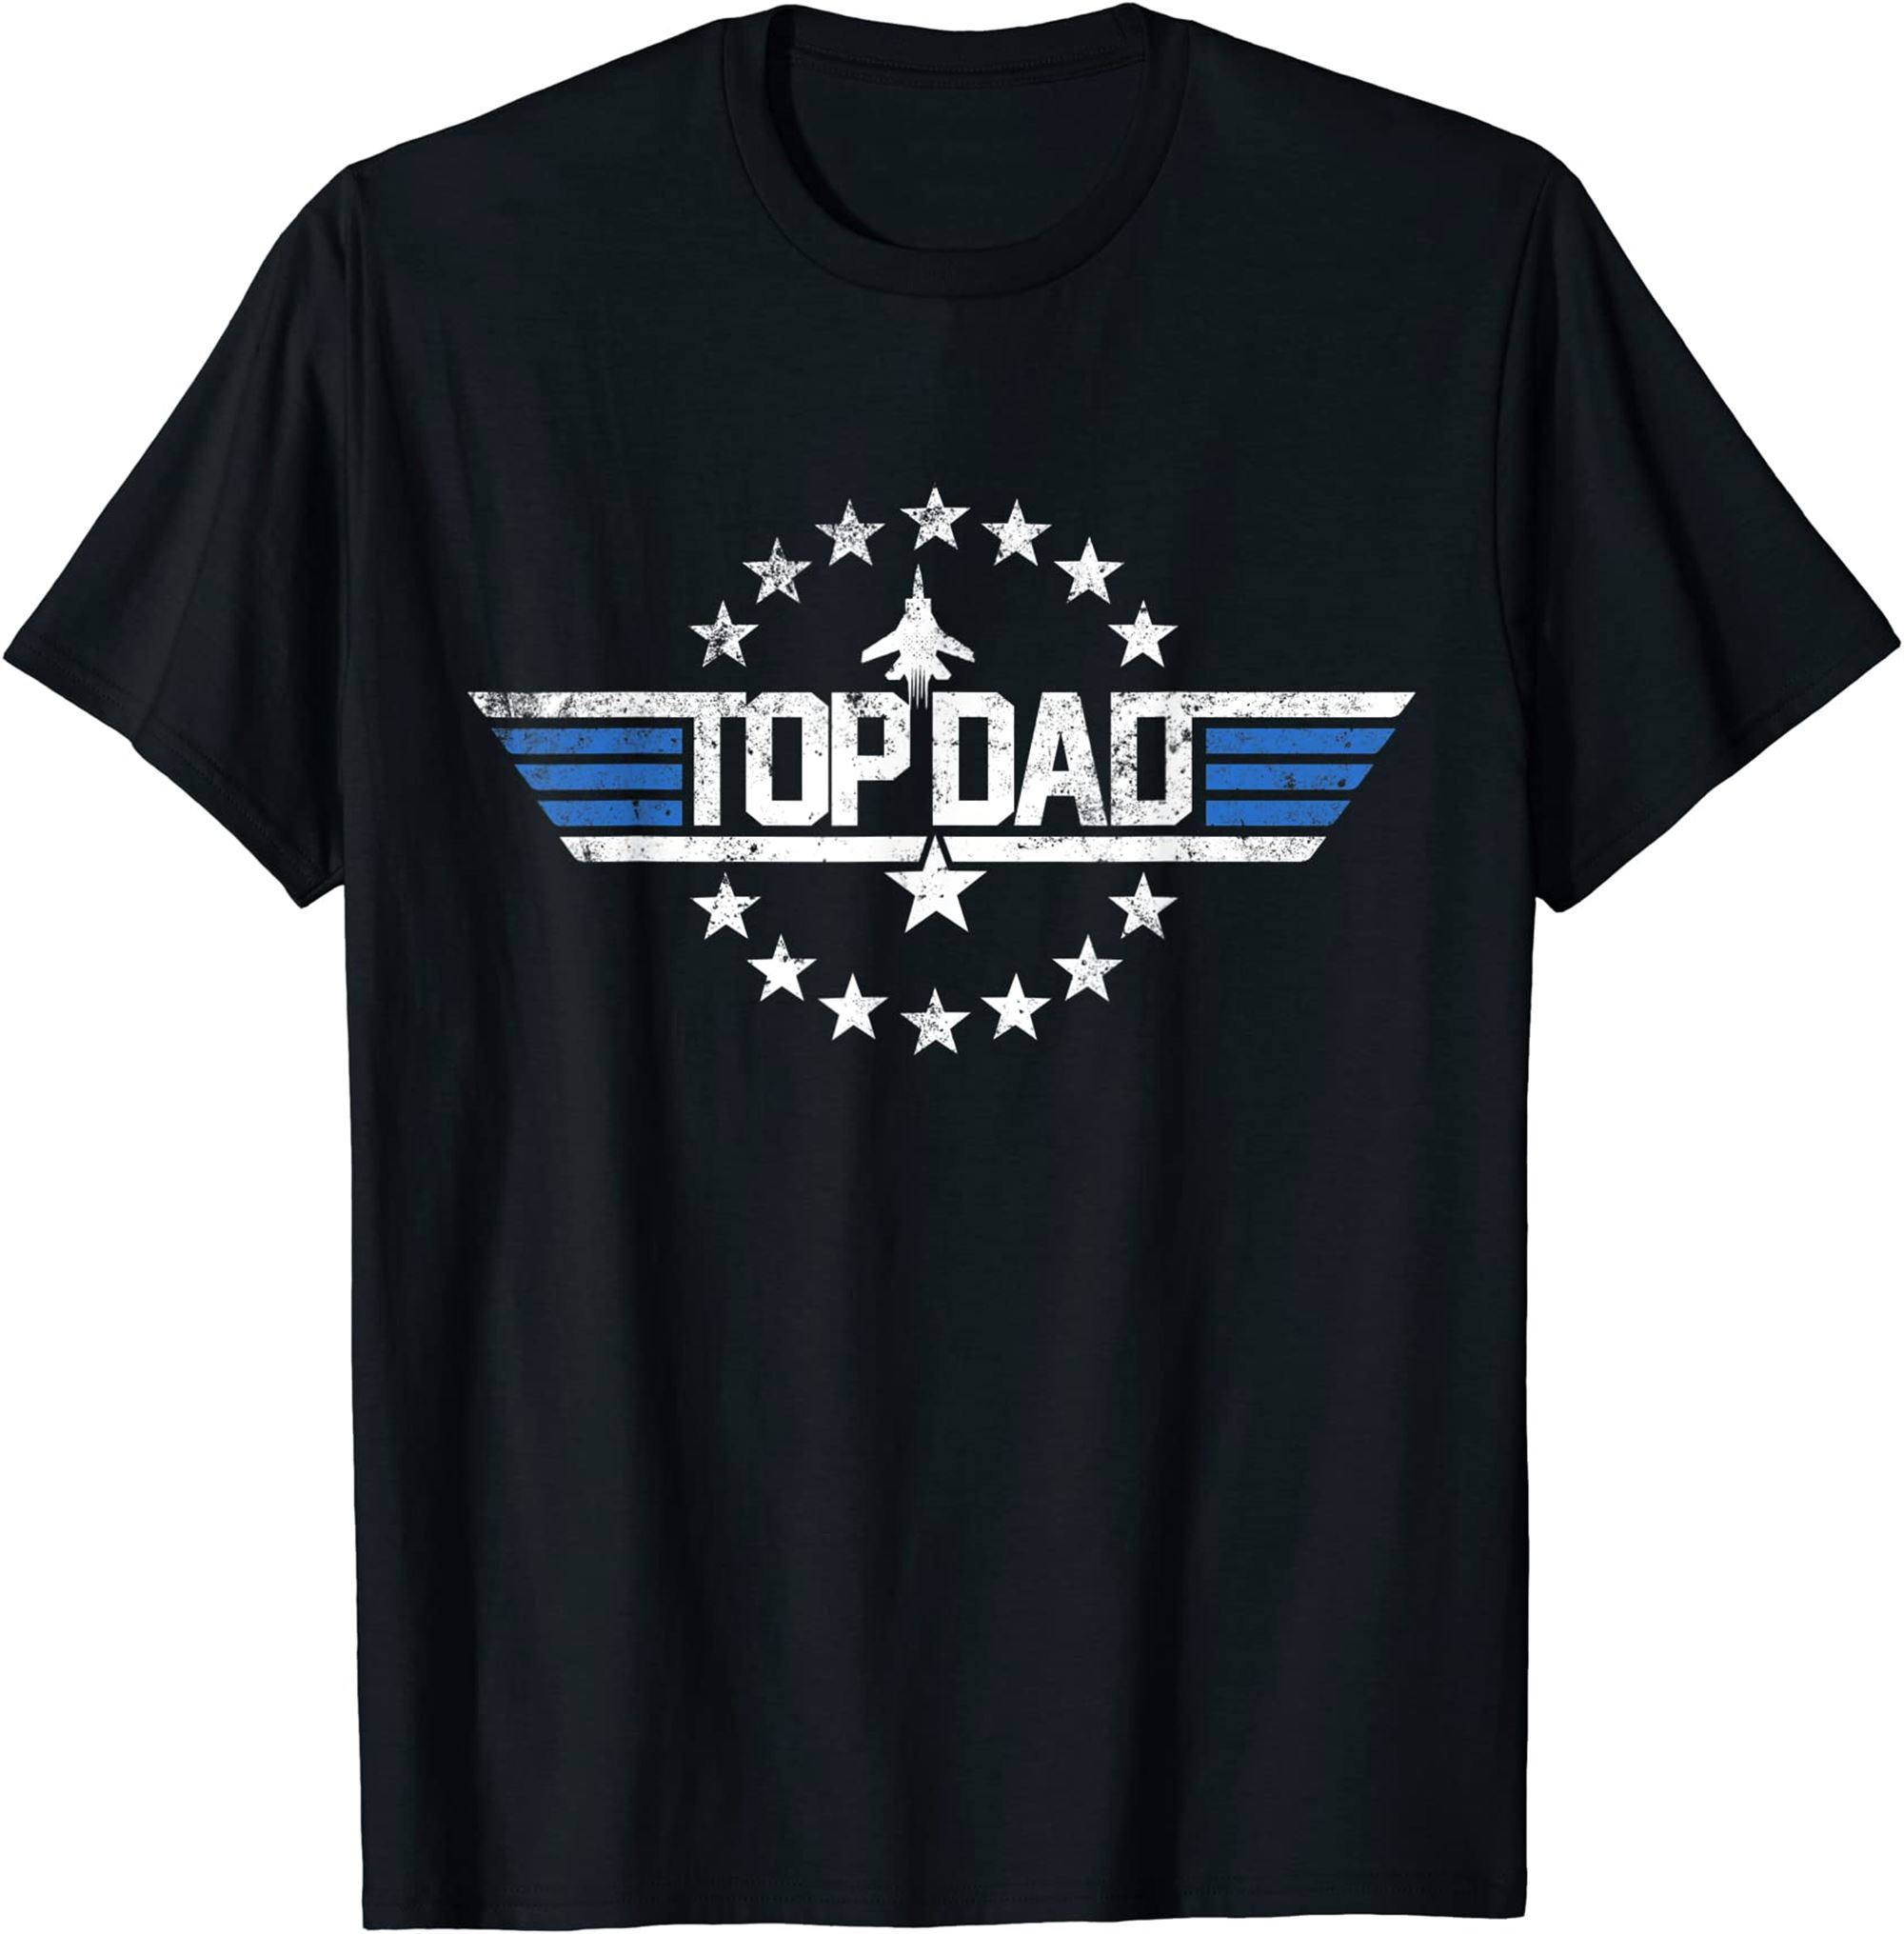 Mens Christmas Birthday Gift For Top Dad Birthday Gun Fathers Da T-shirt Full Size Up To 5xl